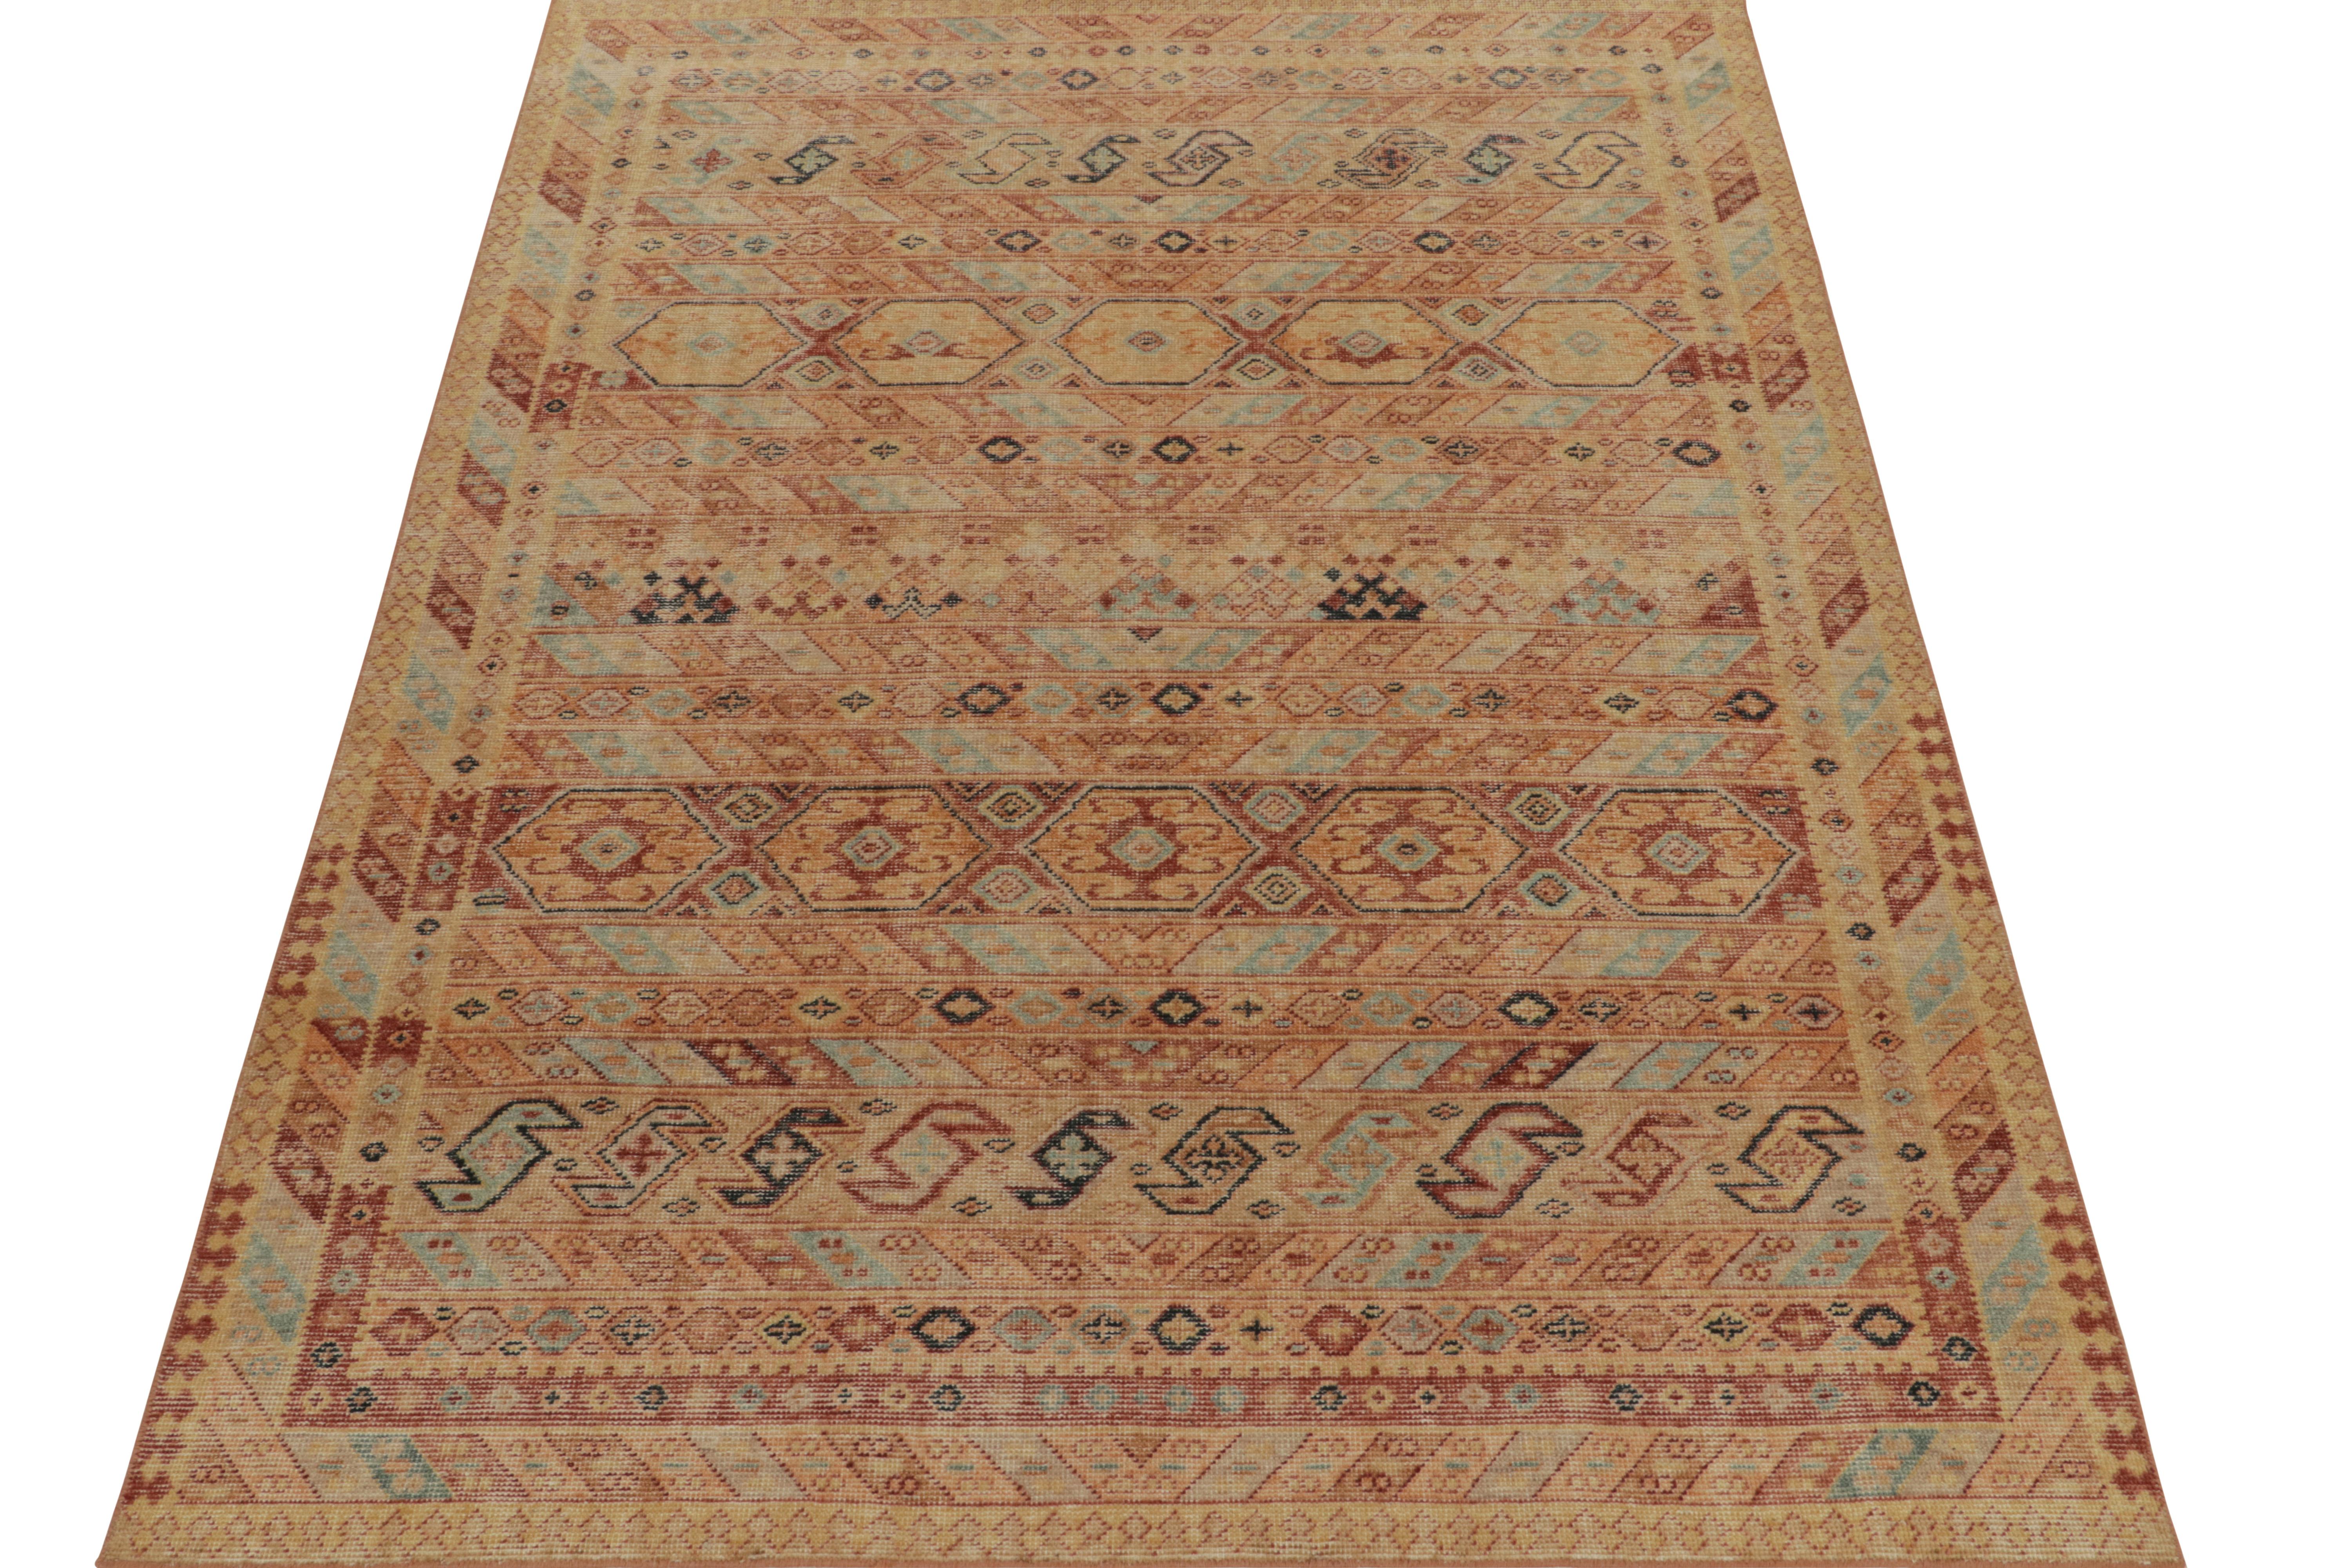 Indian Rug & Kilim’s Distressed Style Rug in Rust, Red and Blue Tribal Patterns For Sale